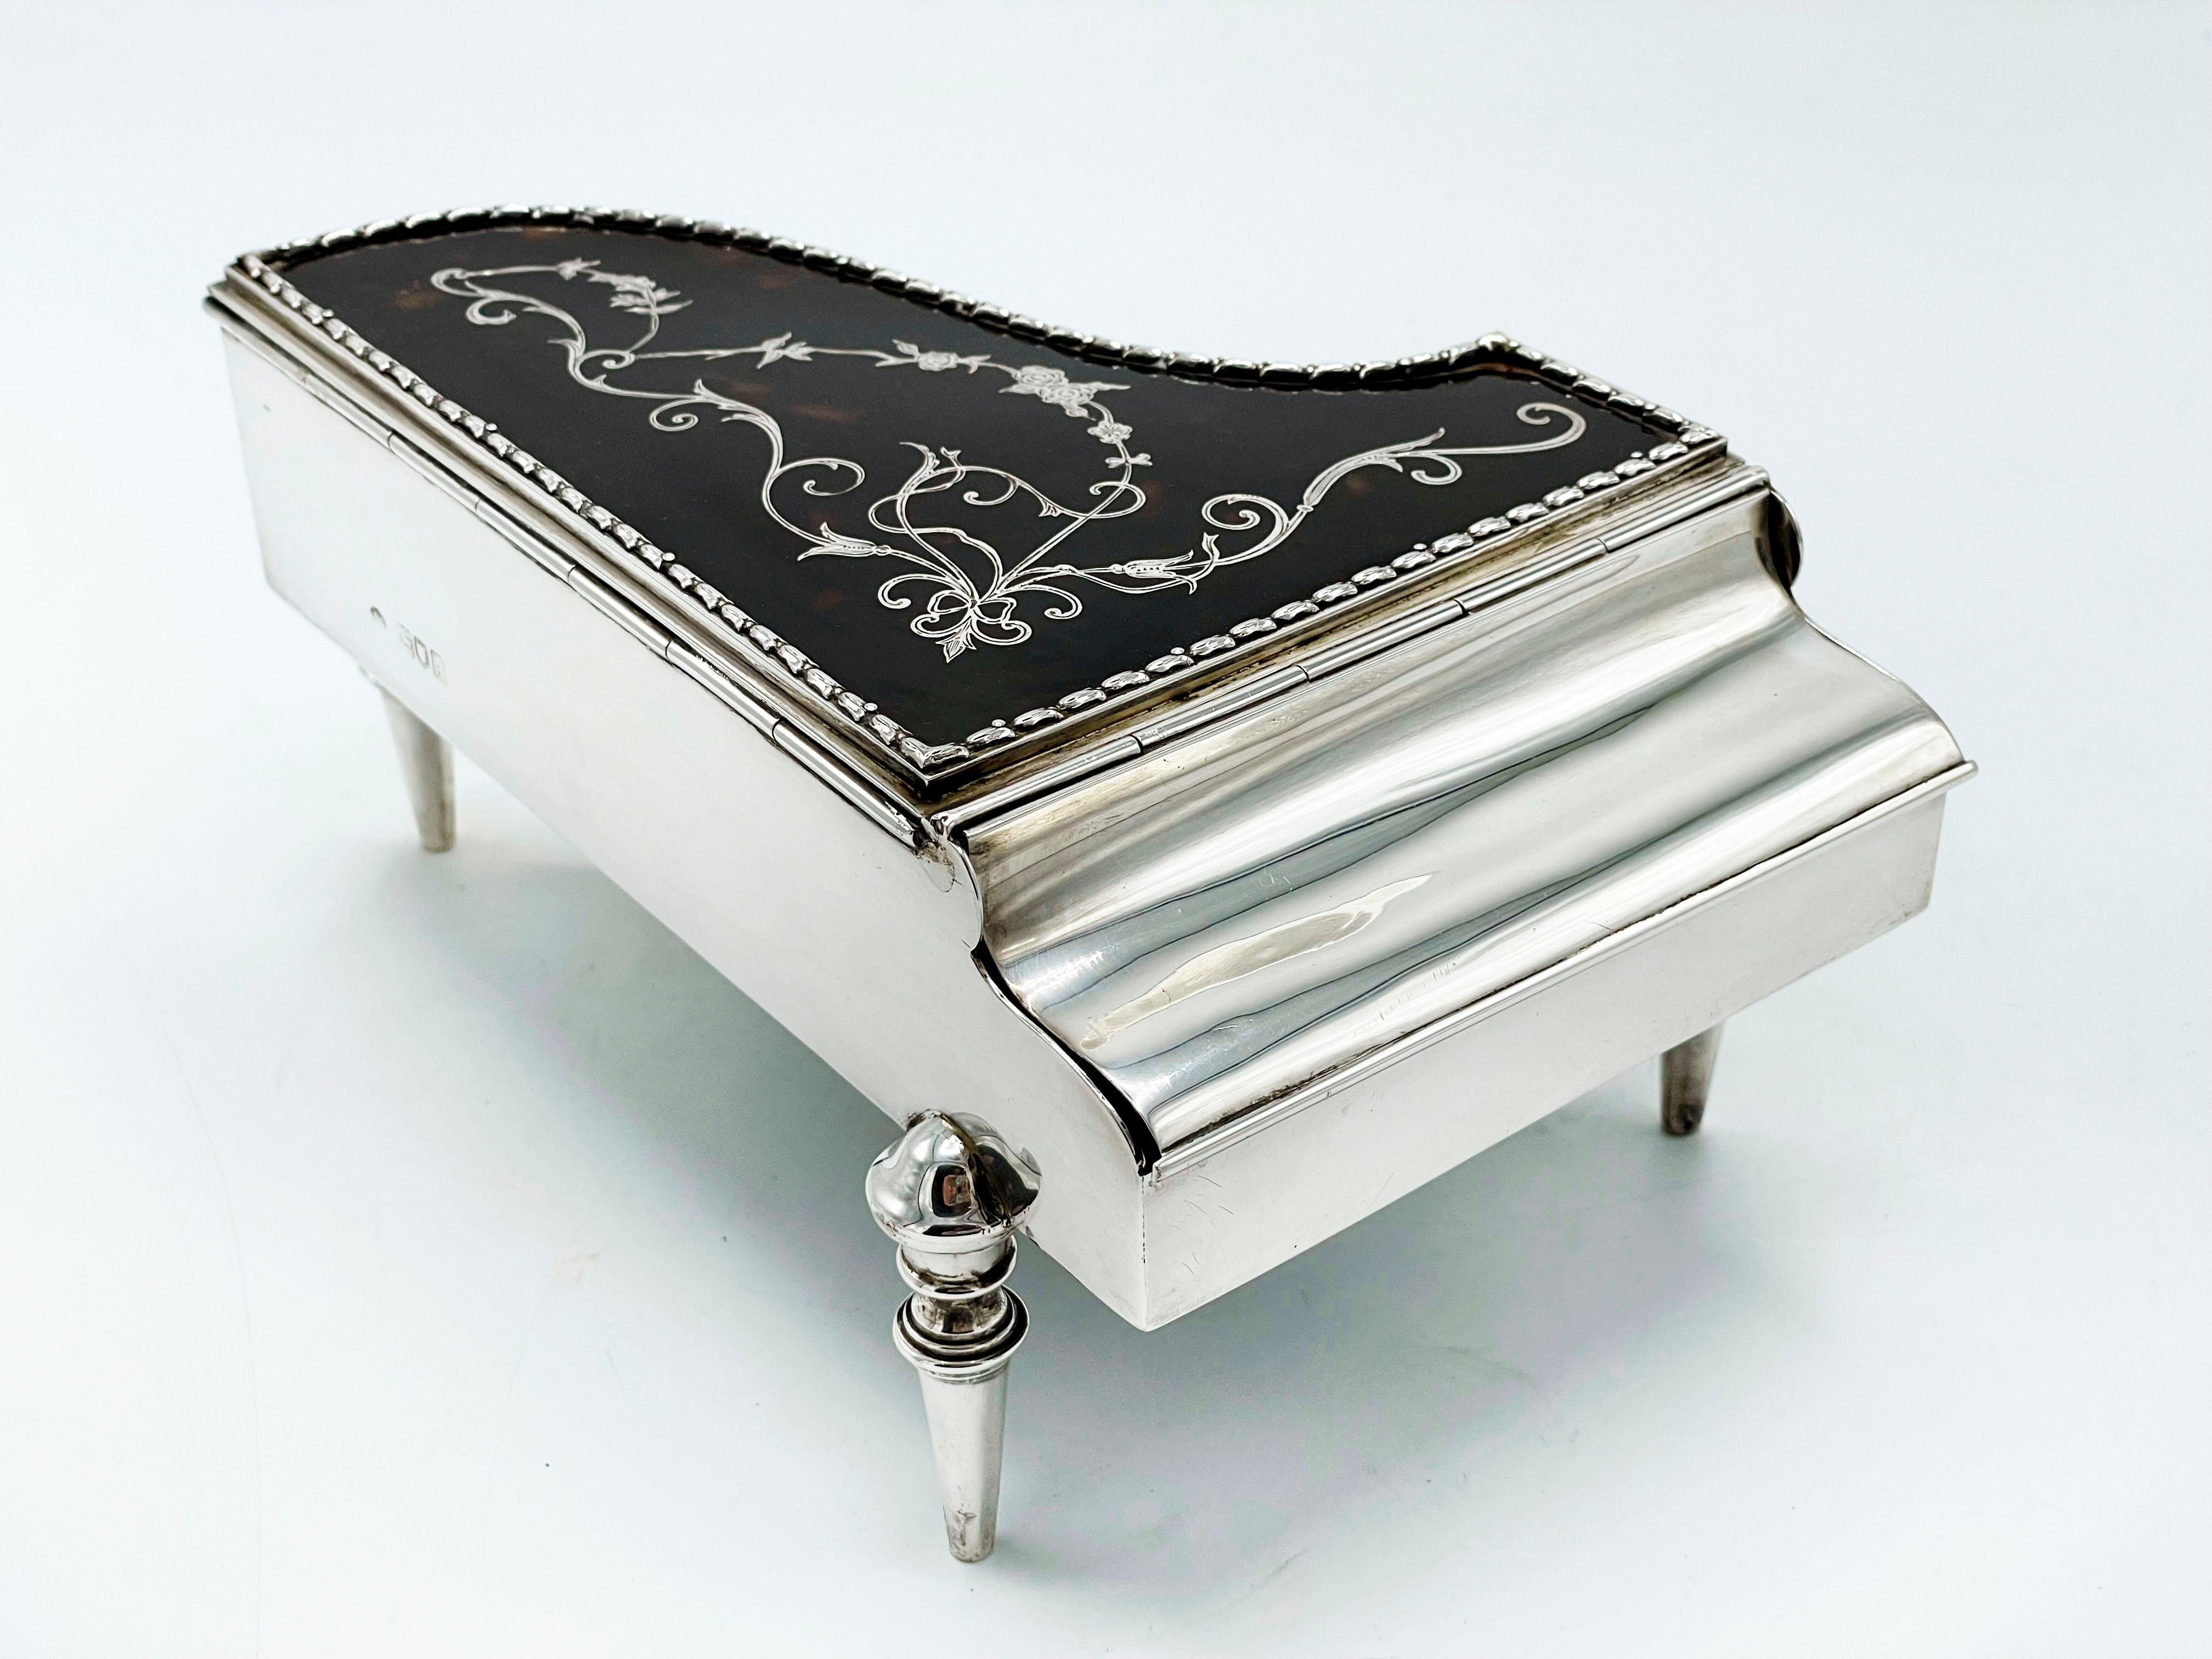 For music lovers.
A very unusual English silver jewelery box shaped like a grand piano.
The 